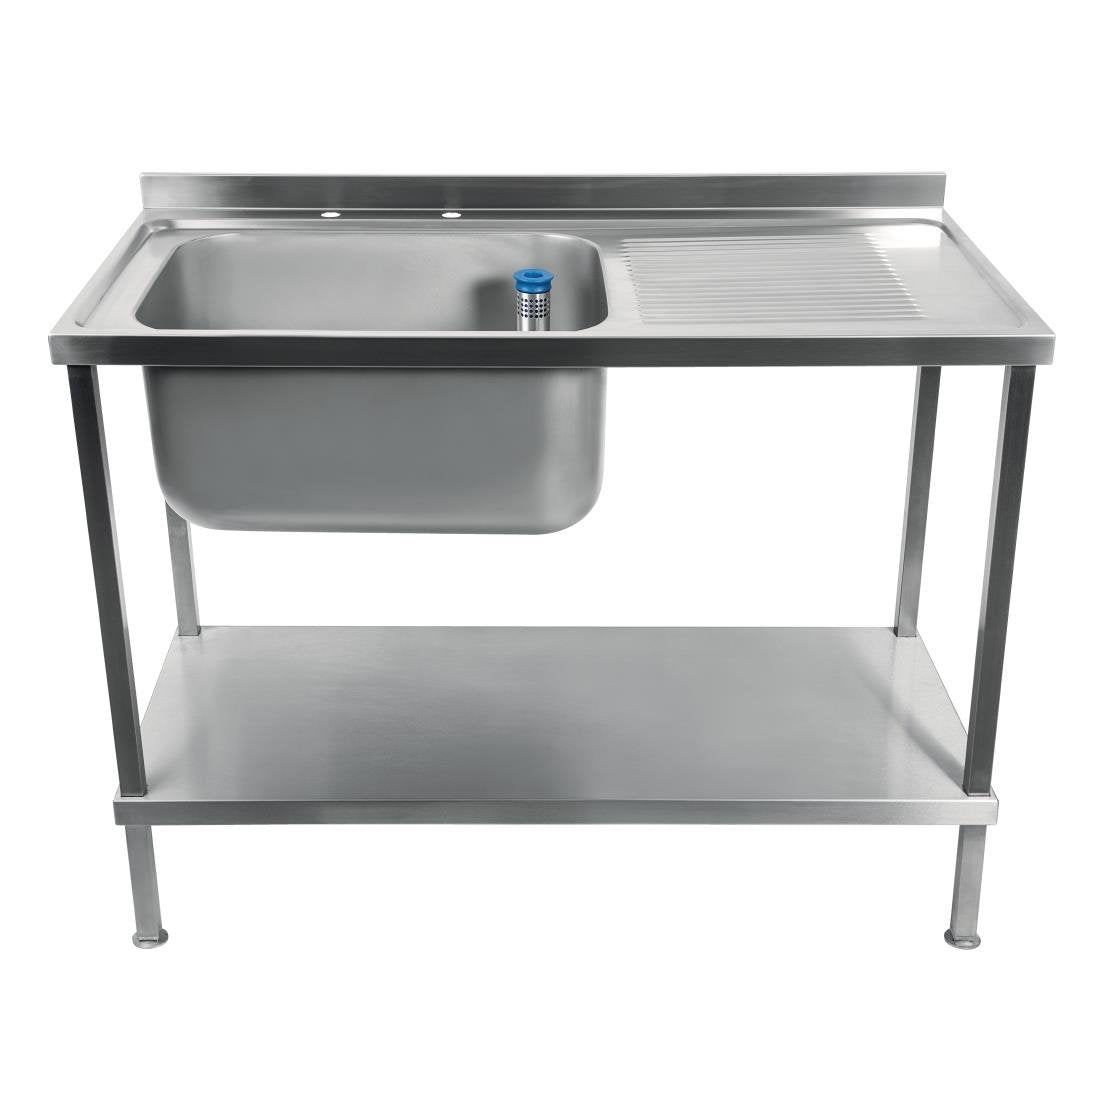 DR390 Holmes Fully Assembled Stainless Steel Sink Right Hand Drainer 1500mm JD Catering Equipment Solutions Ltd